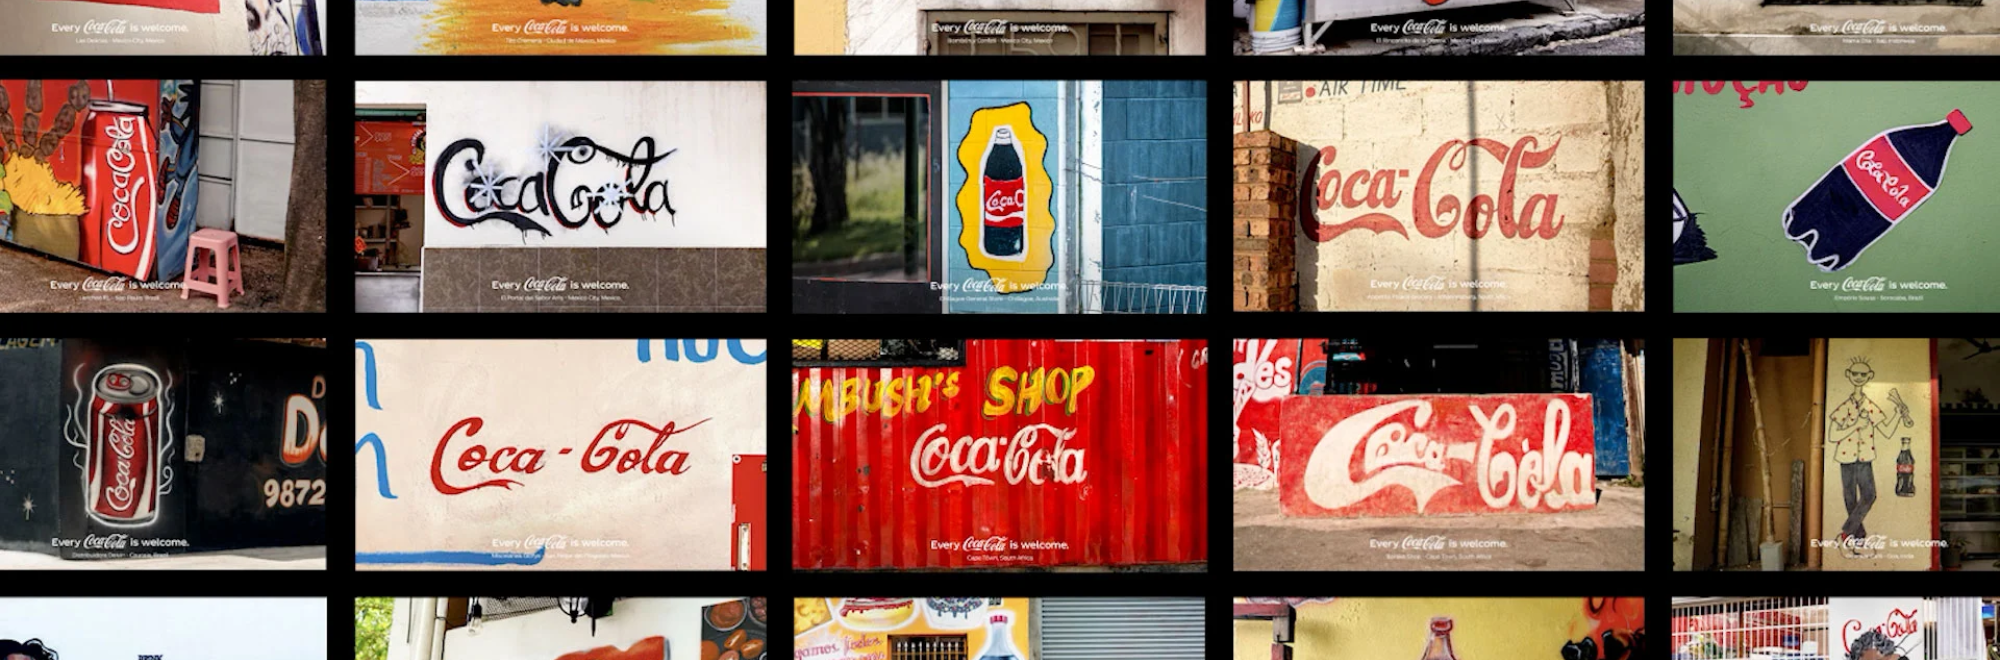 Coca-Cola has been relentlessly disrupting its visual branding lately